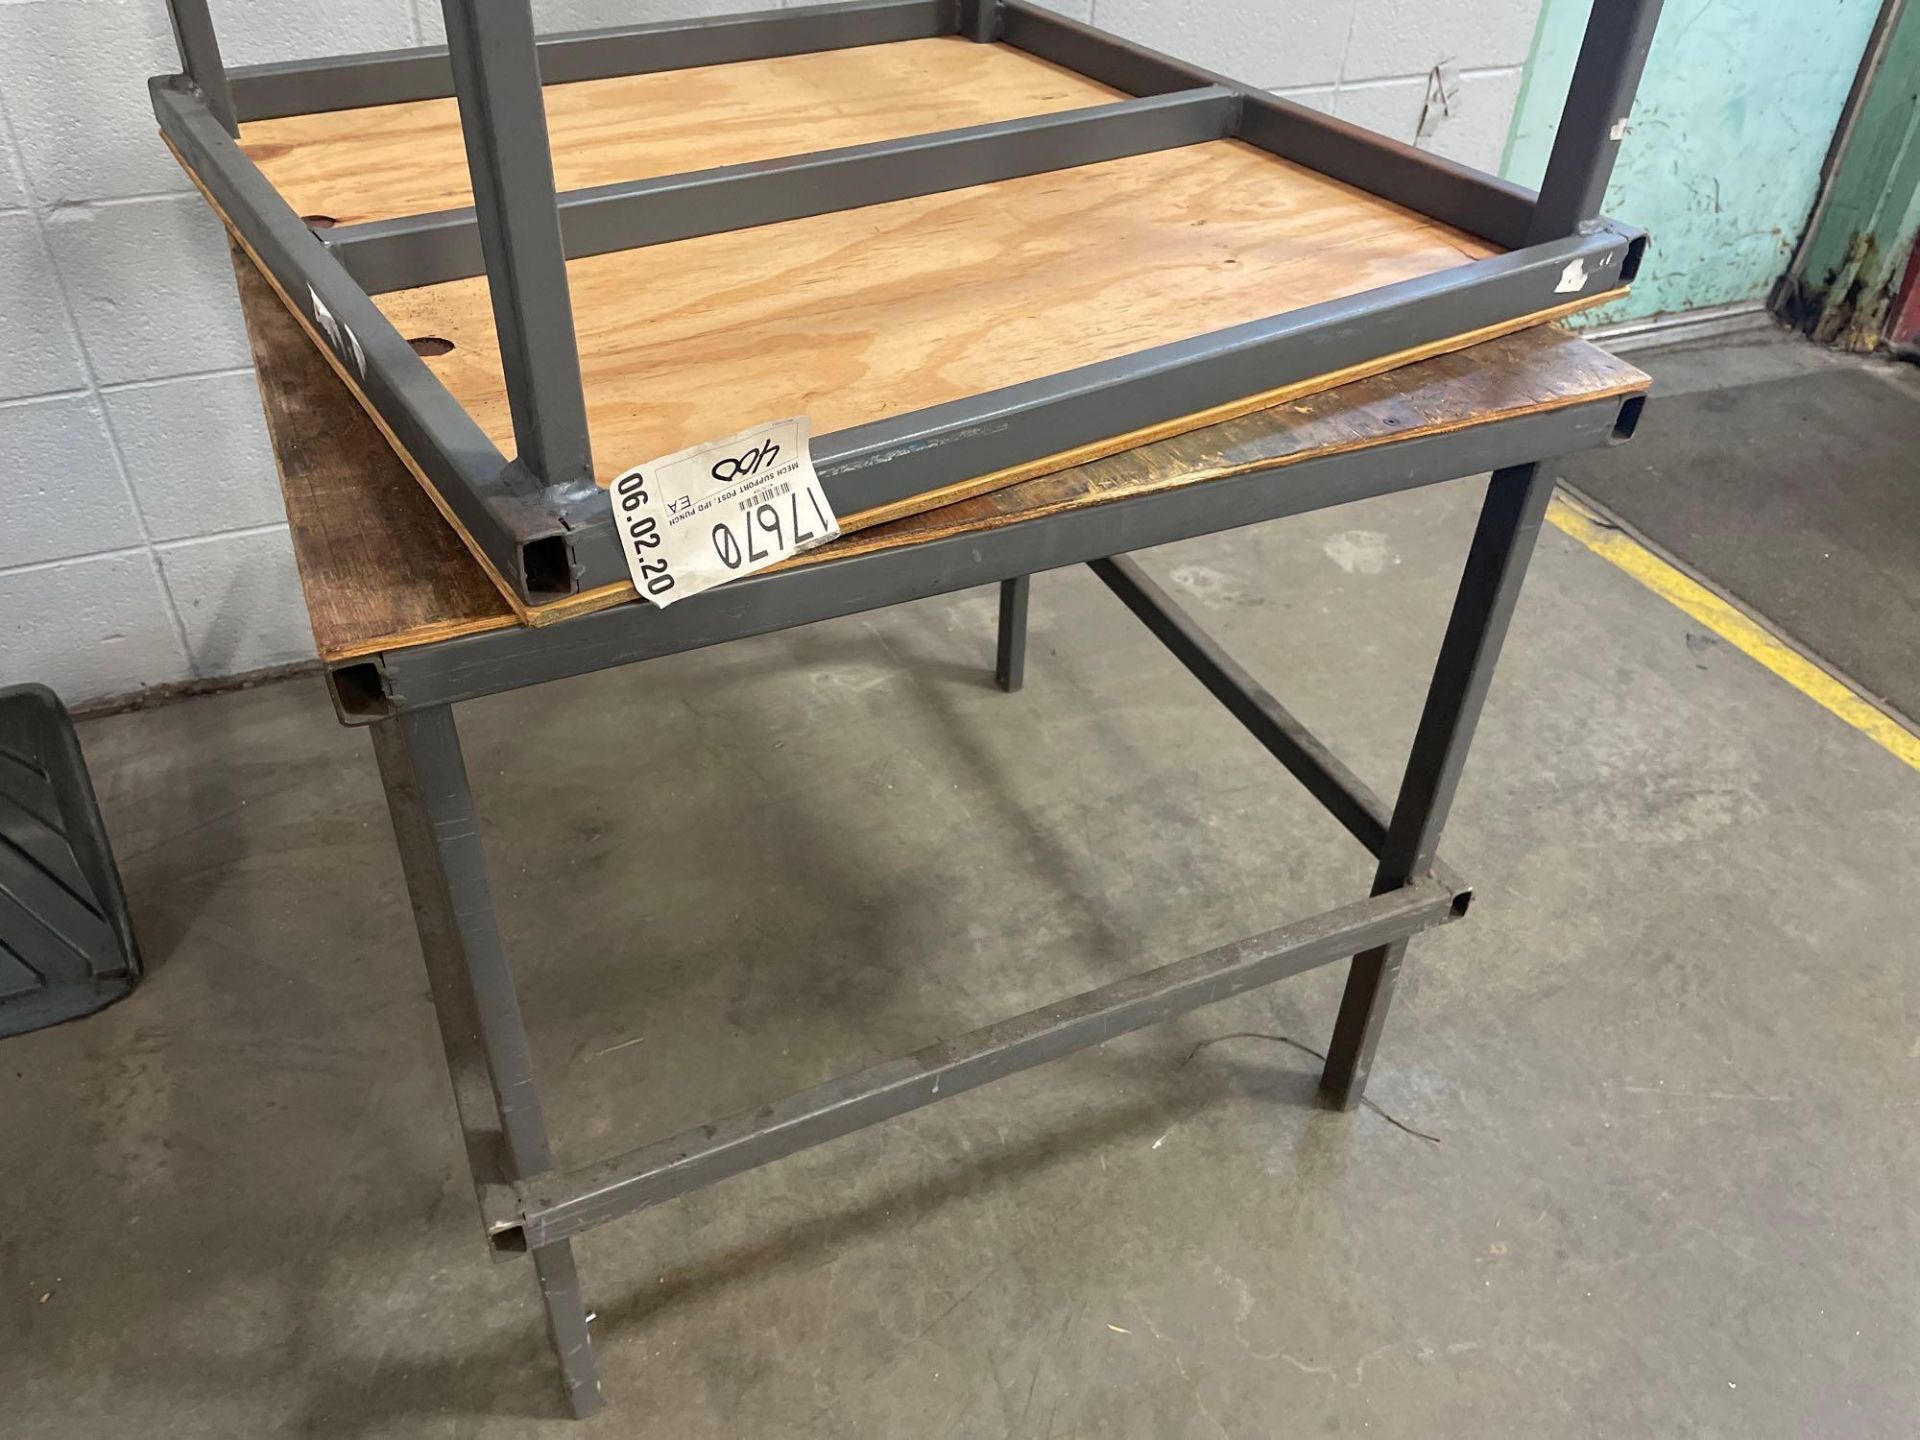 Lot of (2) Metal Frame Tables - Image 2 of 3